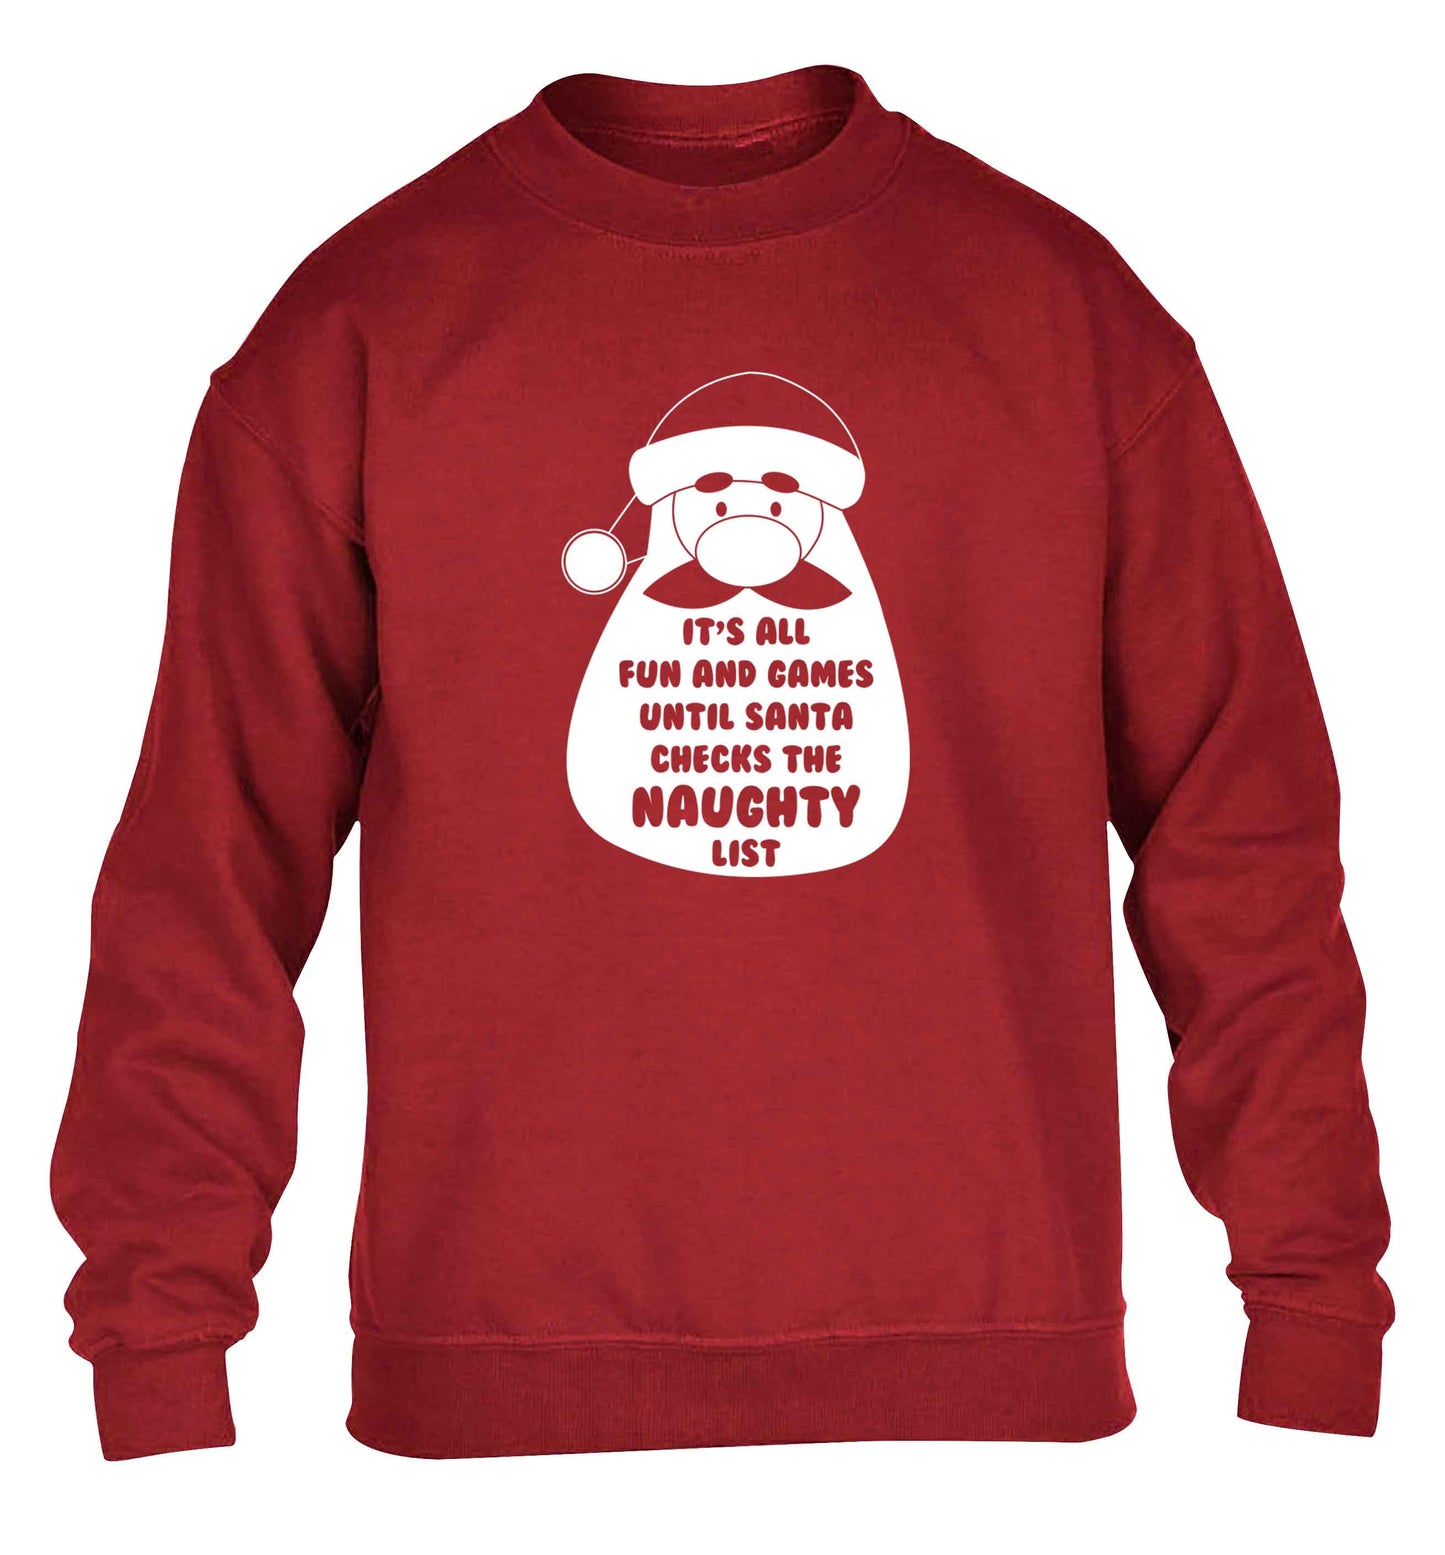 It's all fun and games until Santa checks the naughty list children's grey sweater 12-13 Years